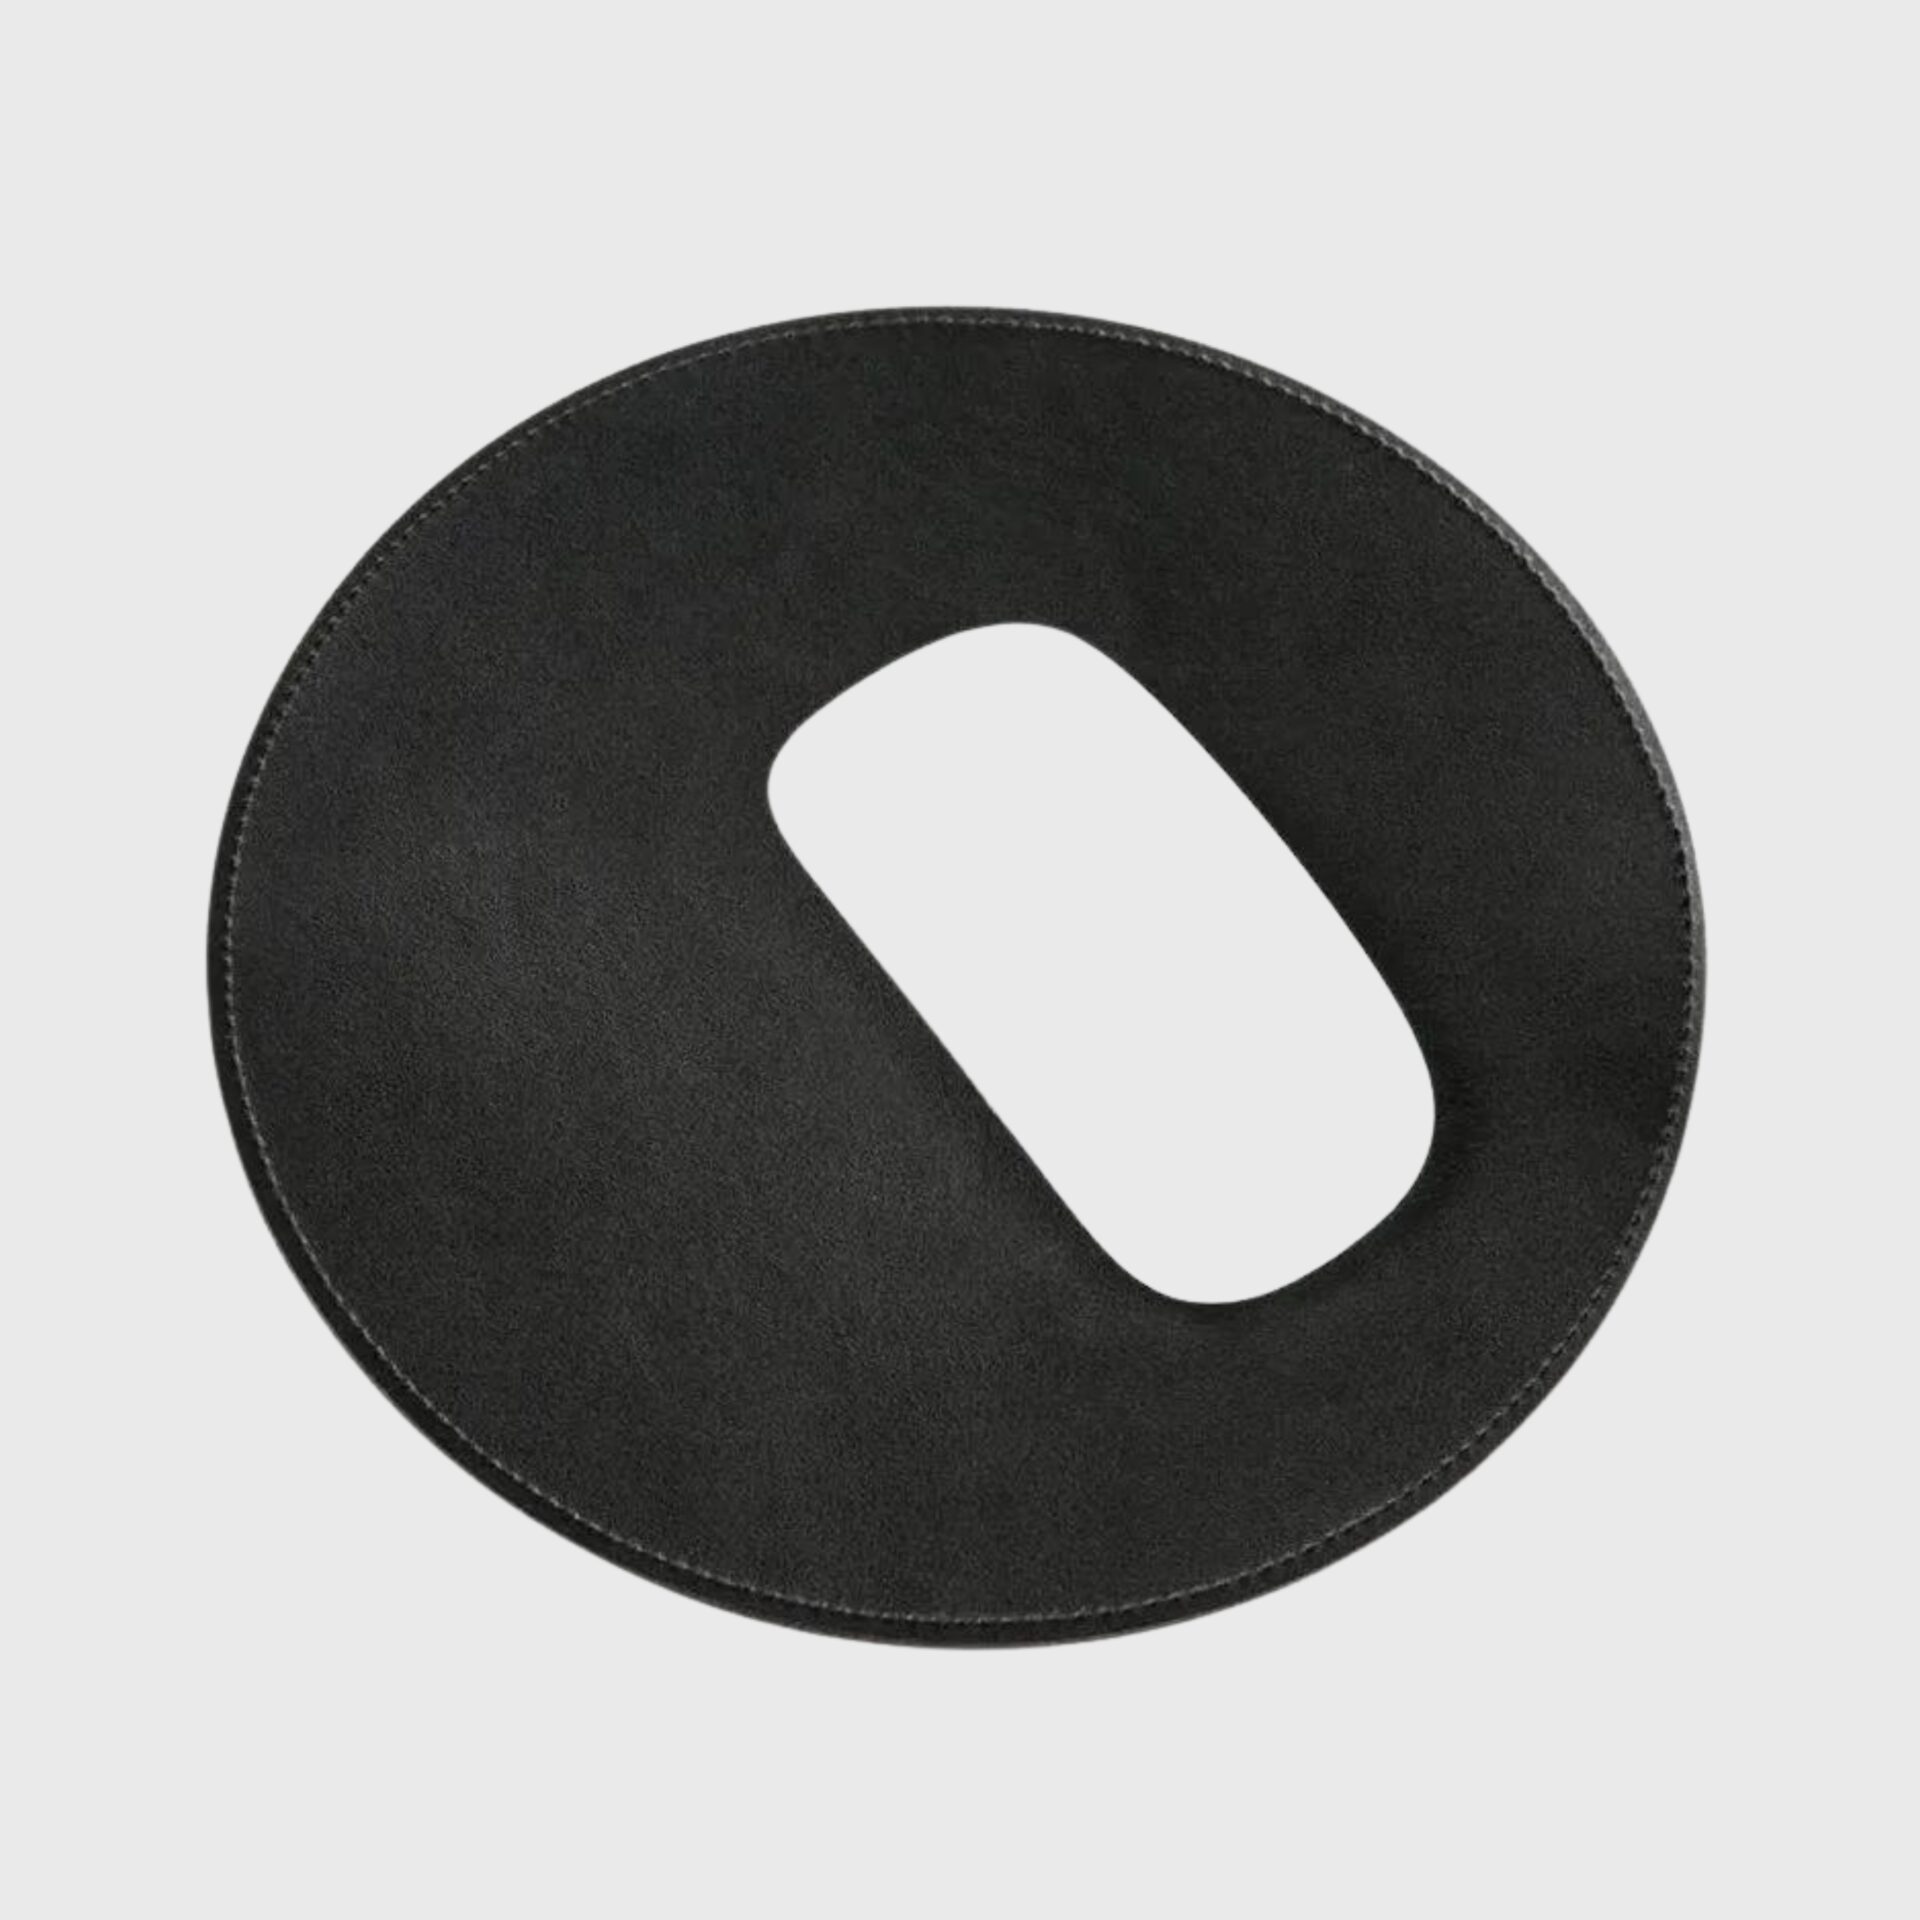 kyklos leather mouse pad black corporate gifts singapore